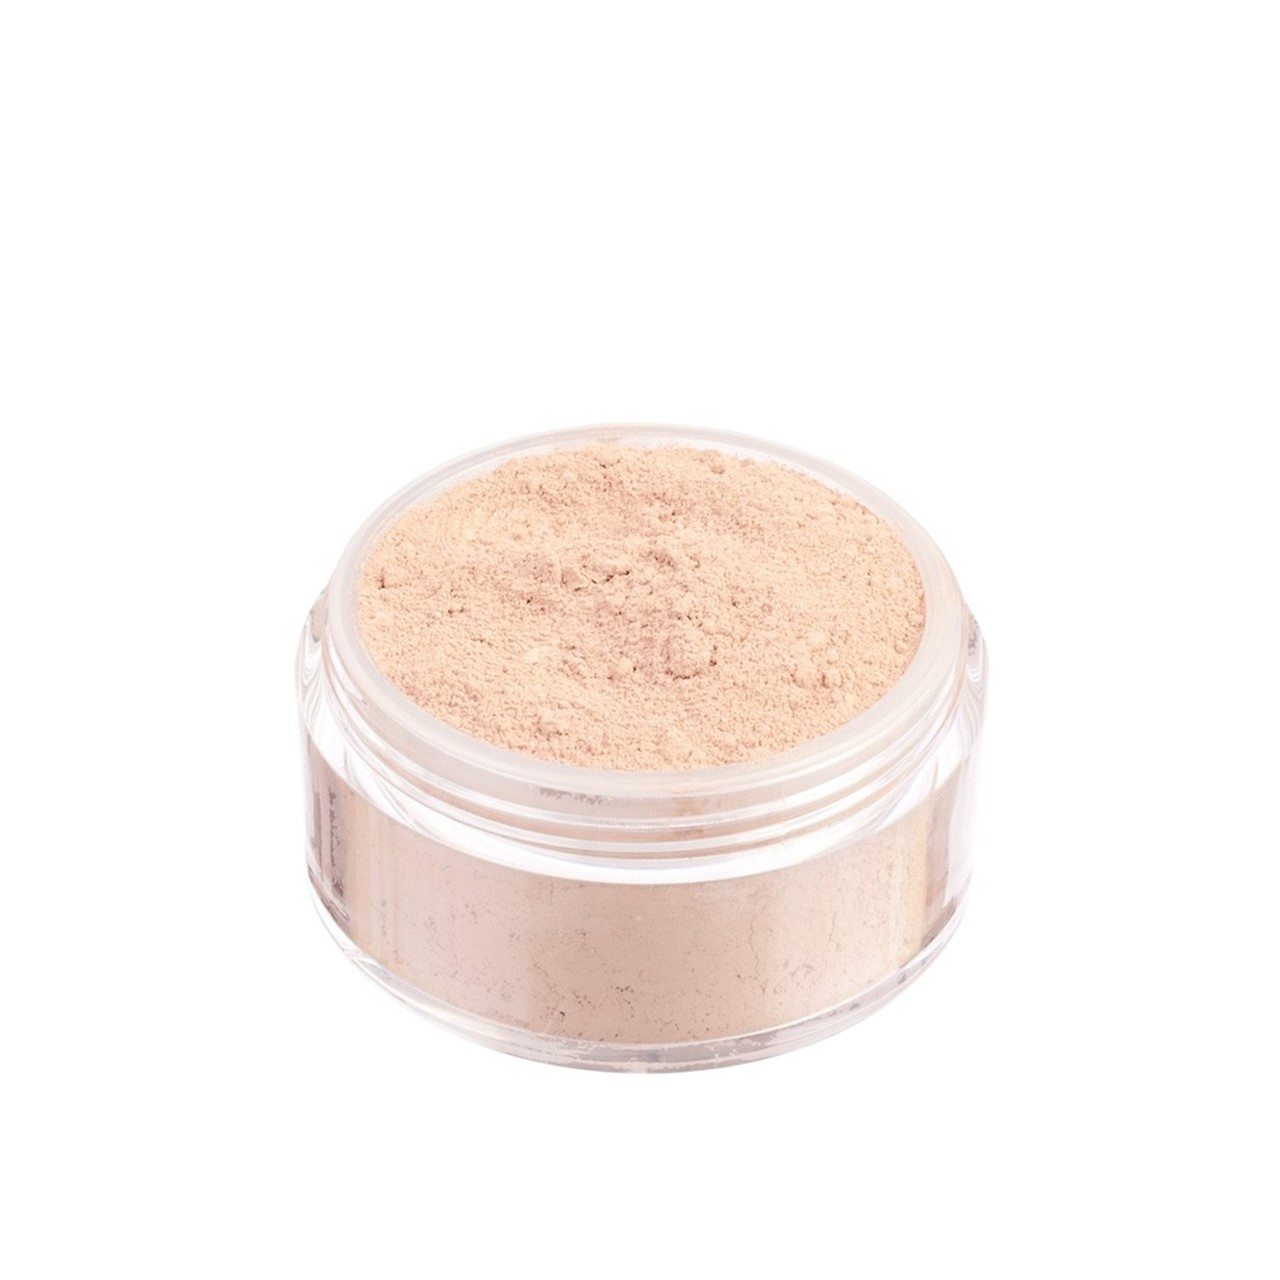 Neve Cosmetics High Coverage Mineral Foundation Fair Neutral 8g